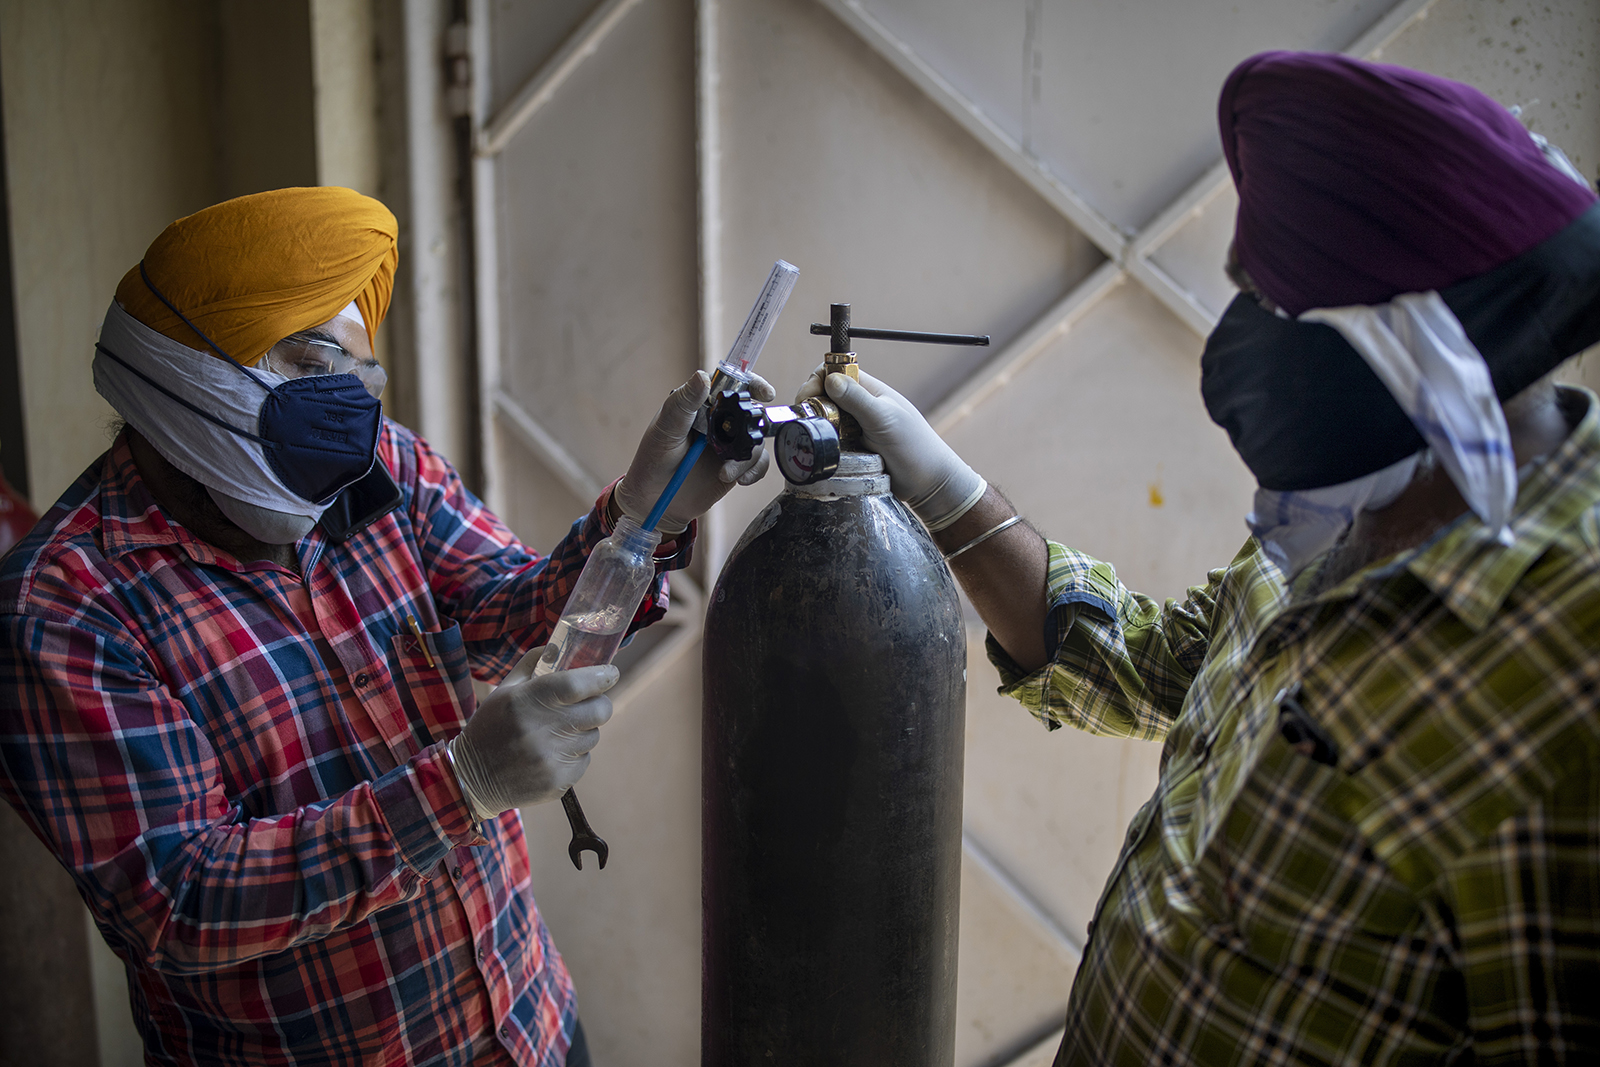 Volunteers from a Gurdwara, a Sikh house of worship, prepare oxygen cylinders for patients in New Delhi, India, Saturday, April 24, 2021. India’s medical oxygen shortage has become so dire that this gurdwara began offering free breathing sessions with shared tanks to COVID-19 patients waiting for a hospital bed. They arrive in their cars, on foot or in three-wheeled taxis, desperate for a mask and tube attached to the precious oxygen tanks outside the gurdwara in a neighborhood outside New Delhi. (AP Photo/Altaf Qadri)